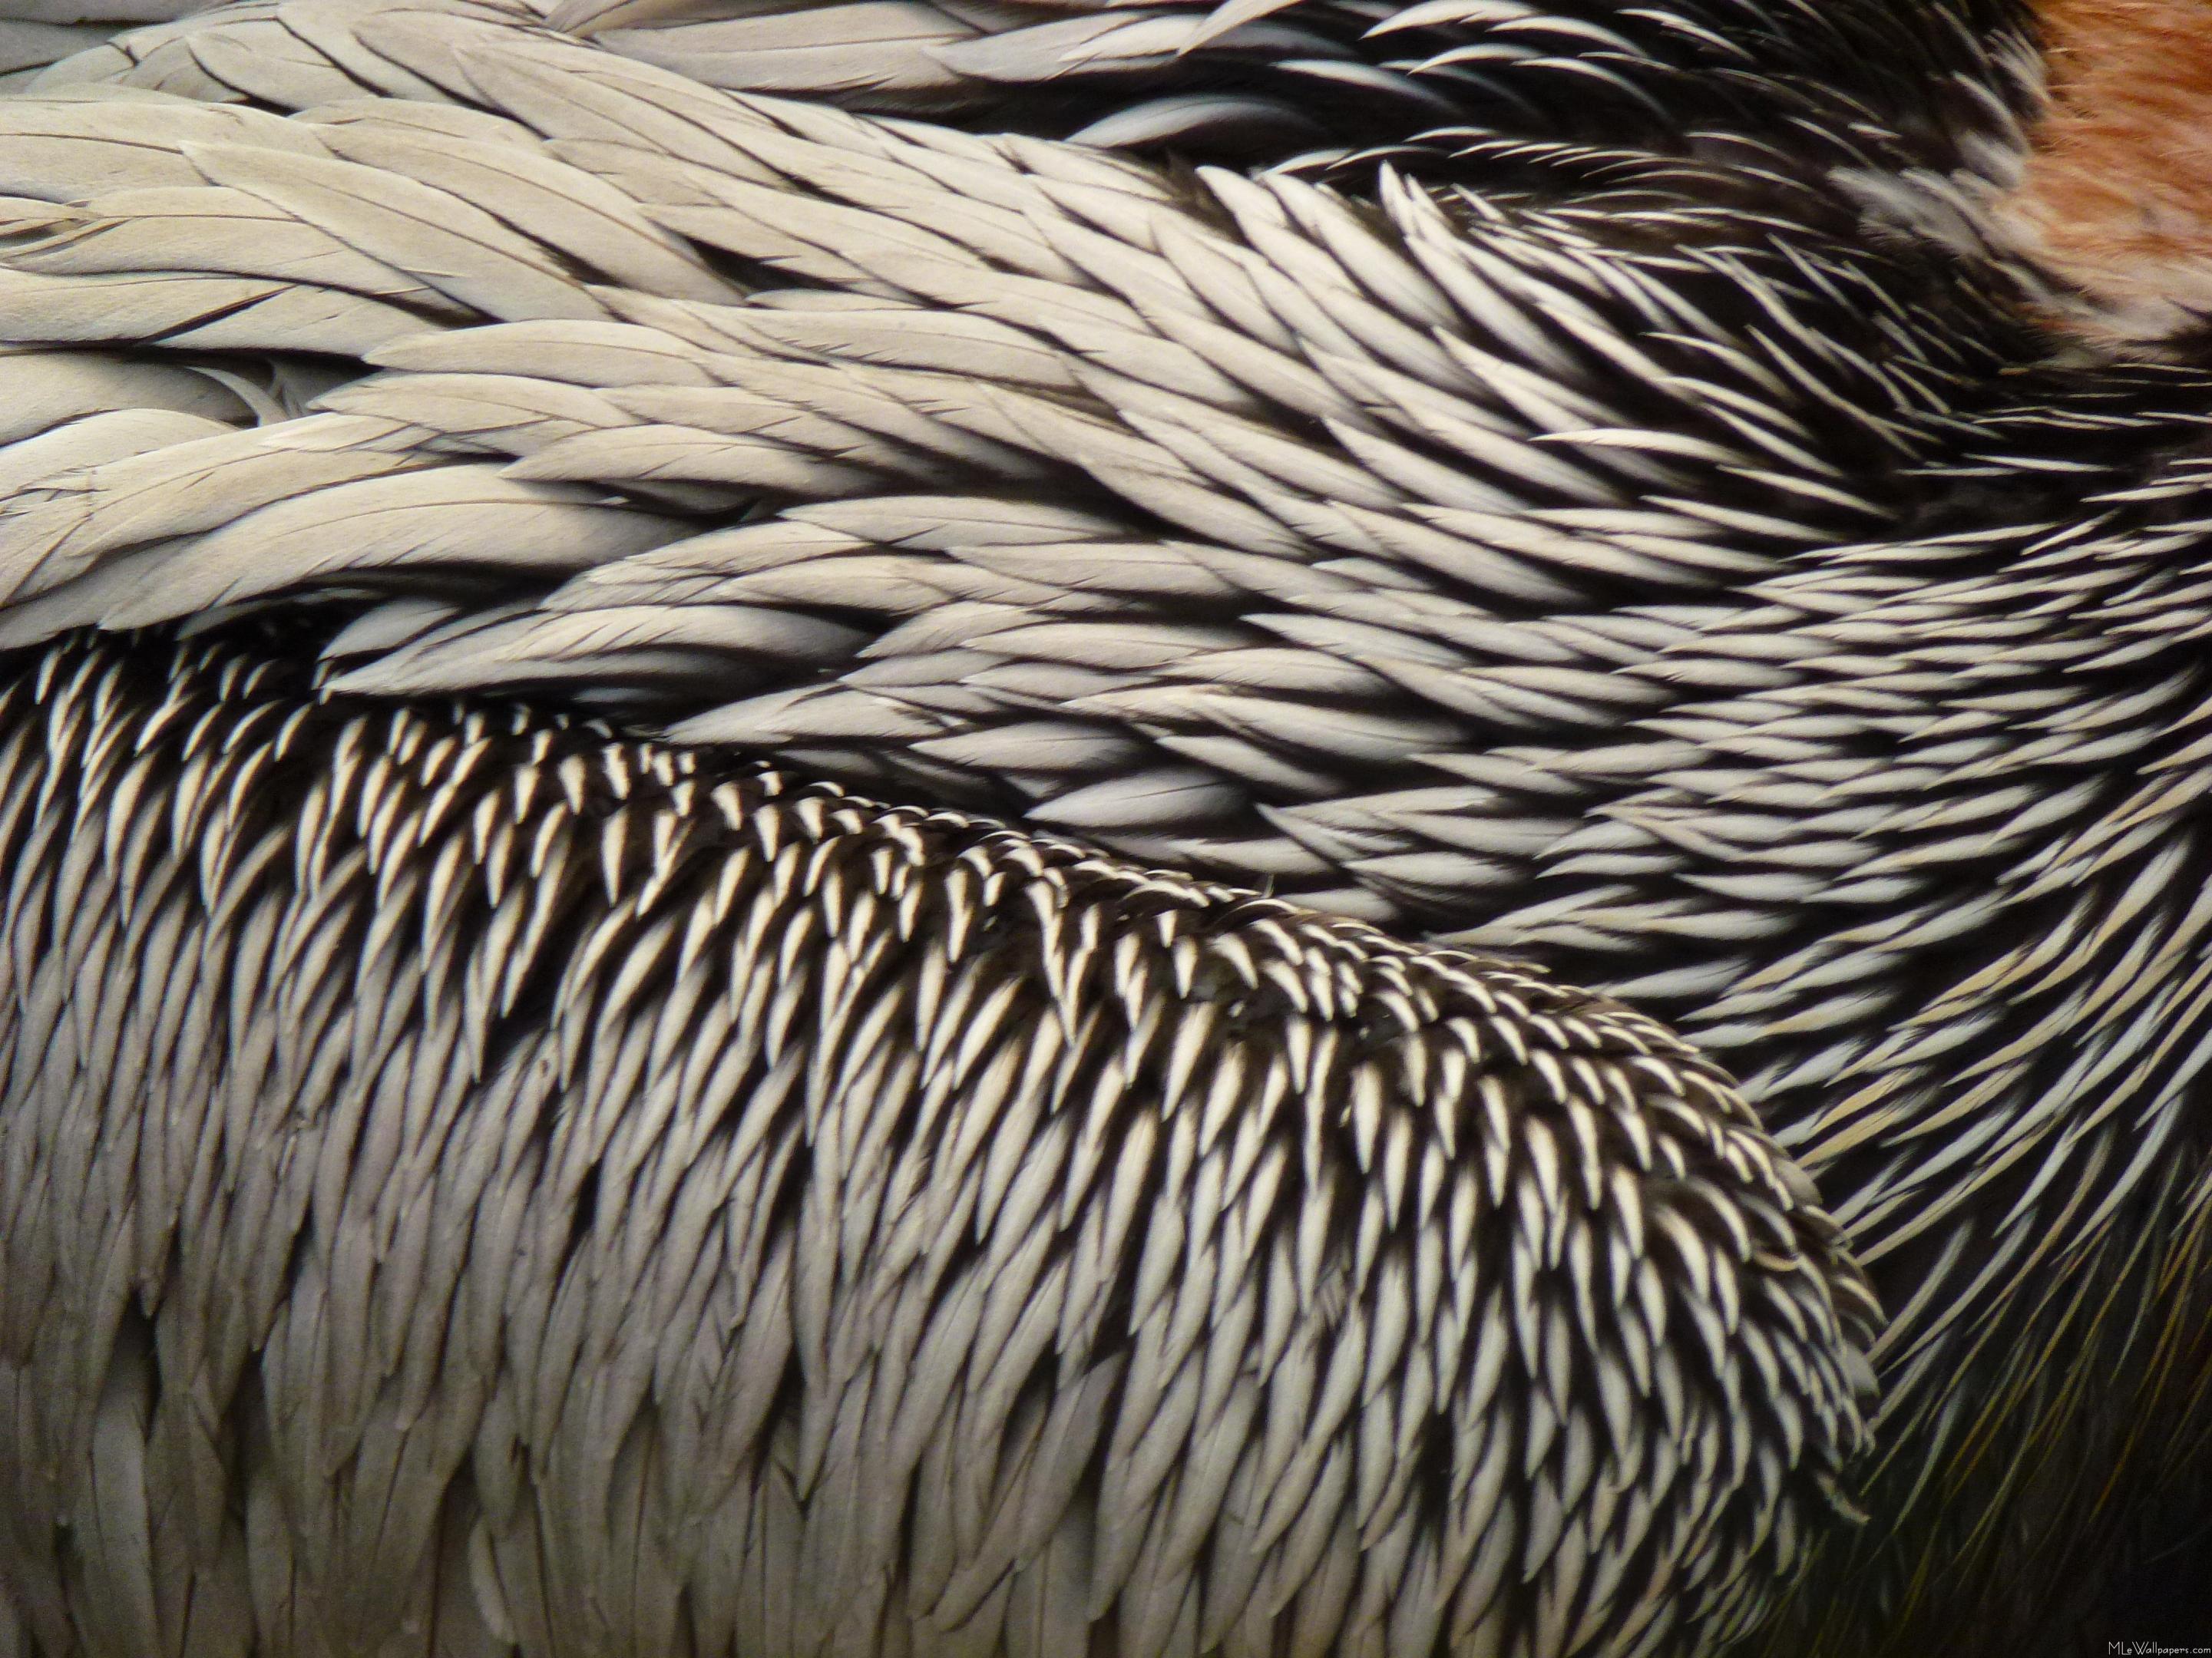 Pelican Feathers - Close Up Birds Feathers - HD Wallpaper 